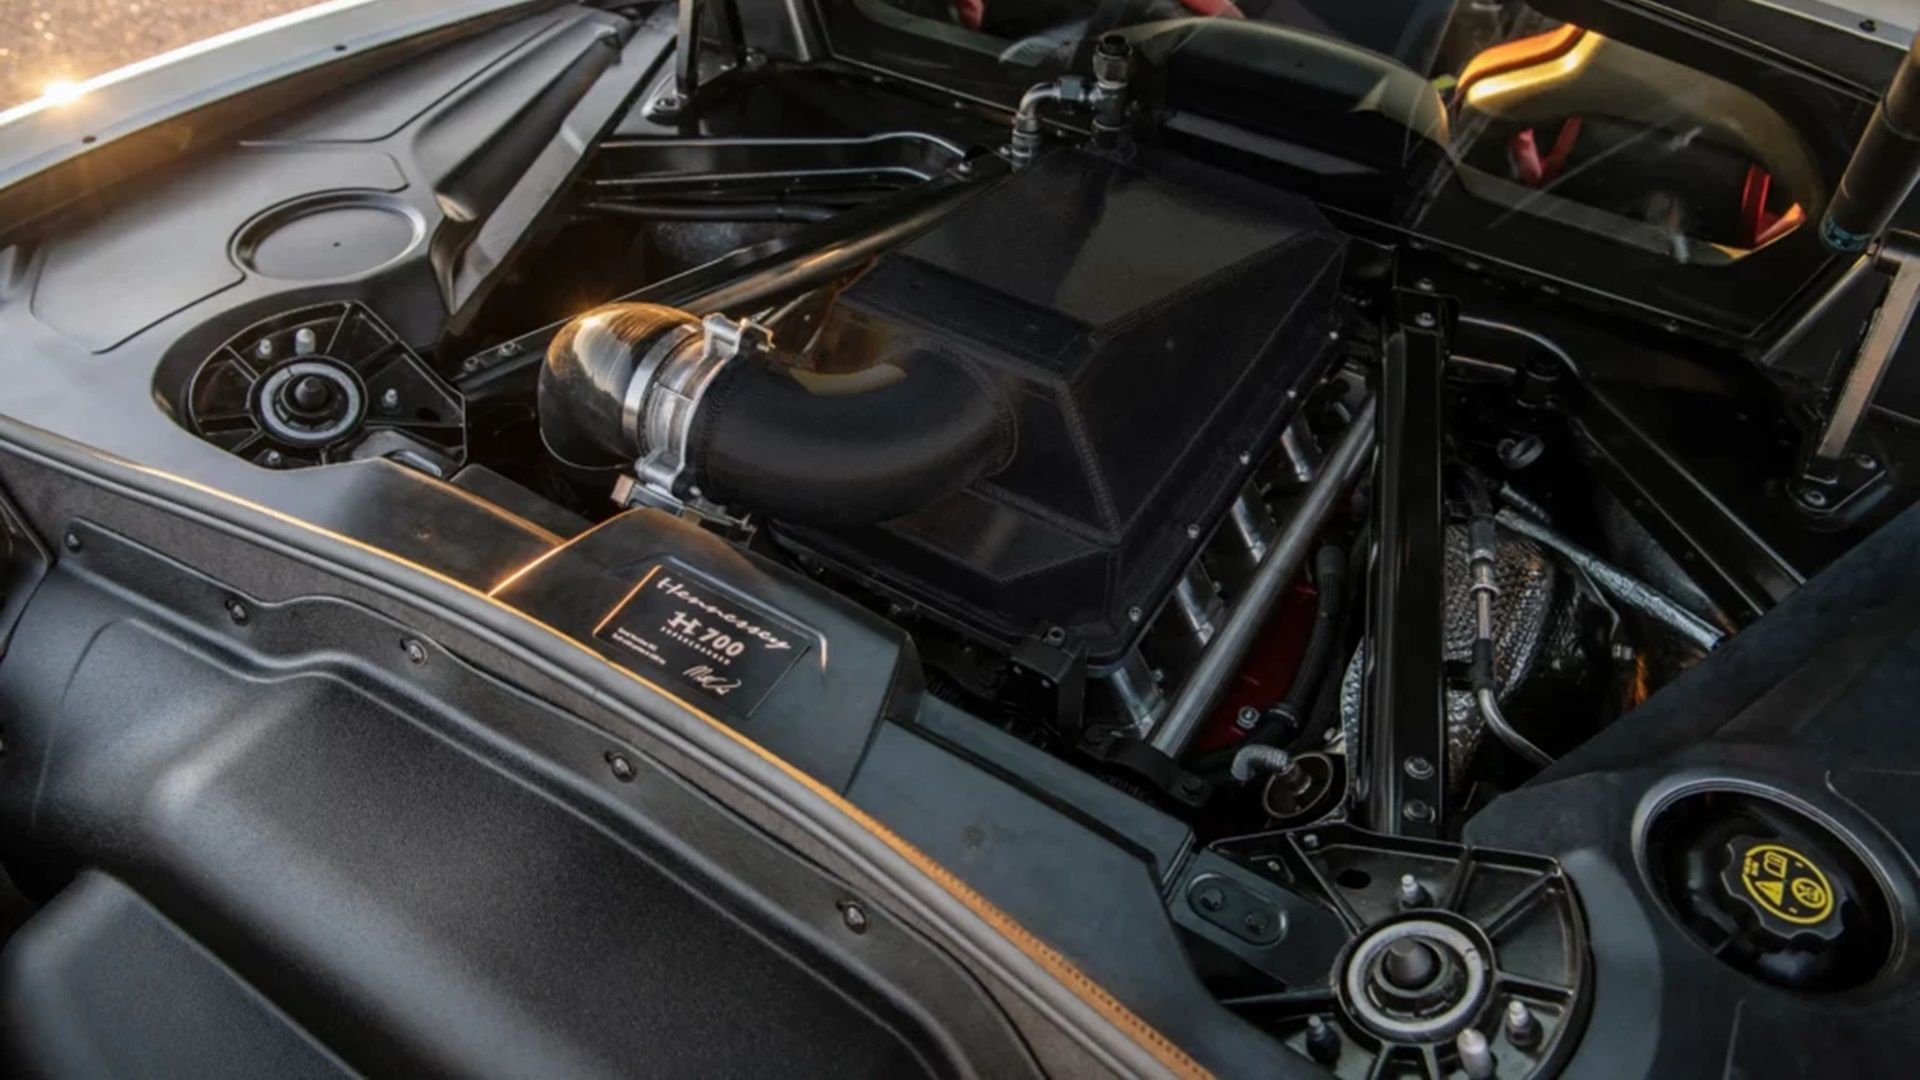 Hennessey Performance C8 Corvette Stingray Engine With A Performance Mod Upgrade Supercharged